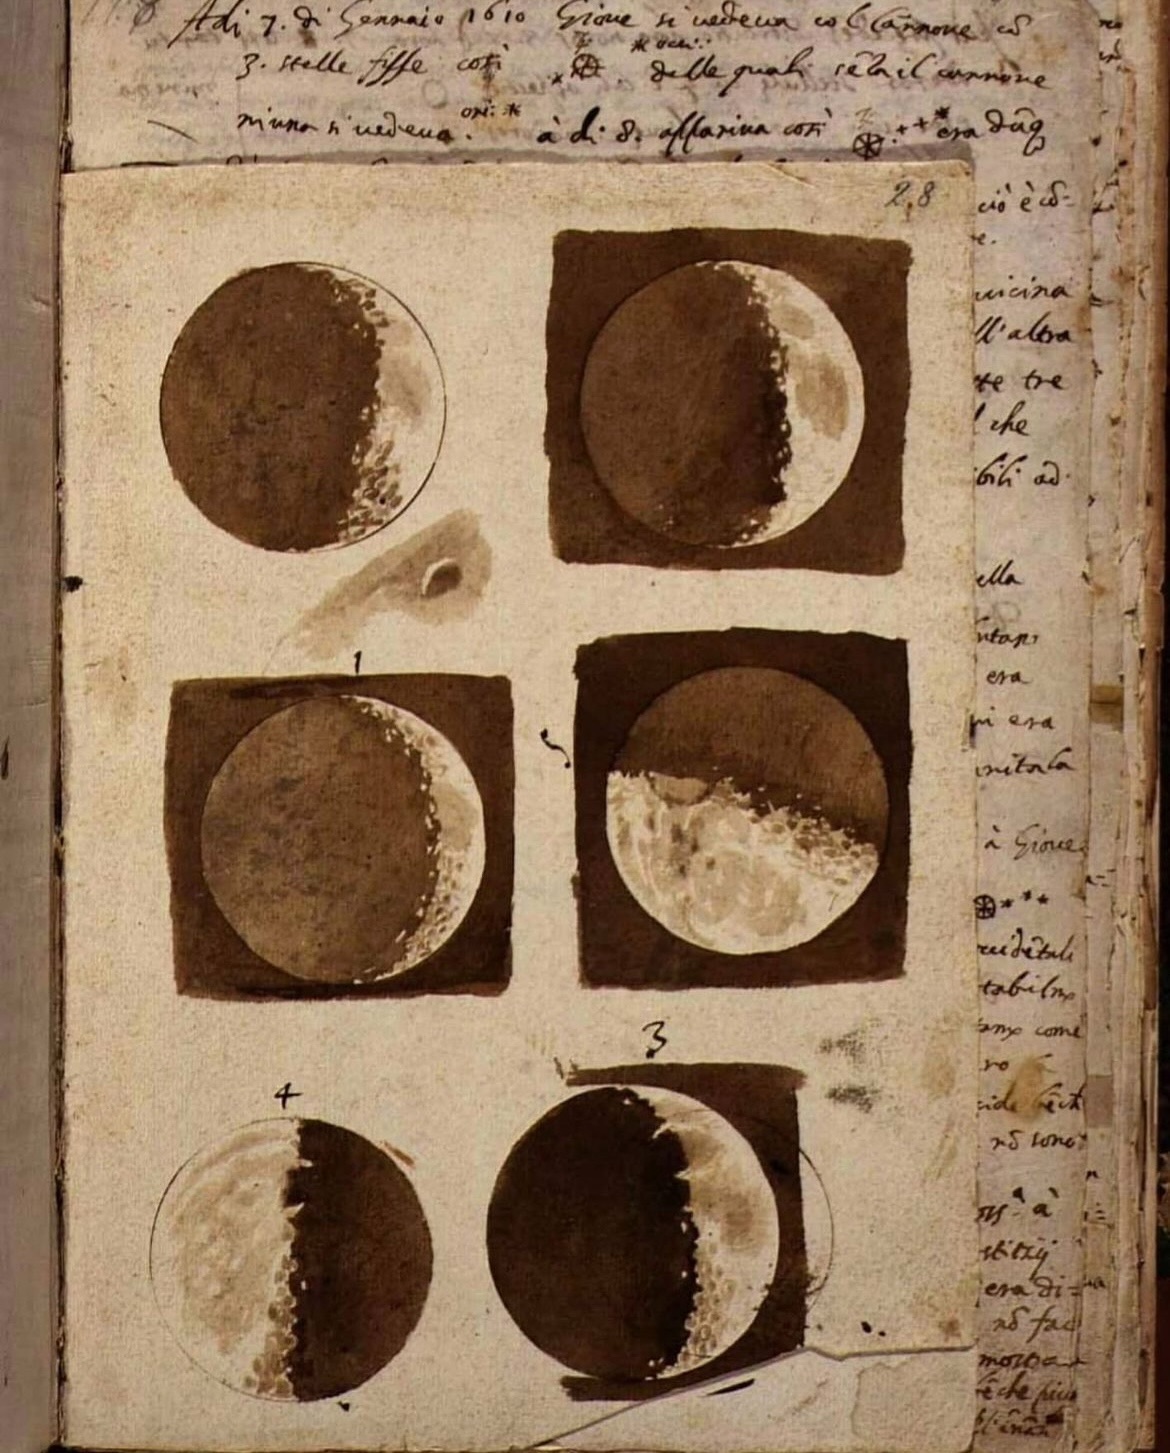 Galileo Galilei, Astronomy. Observations of Lunar Phases, November-December 1609 (1609; autograph paper manuscript, watercolor drawings on paper, 33 x 23 x 1.7 cm; Florence, Biblioteca Nazionale Centrale, ms. Galileiano 48)